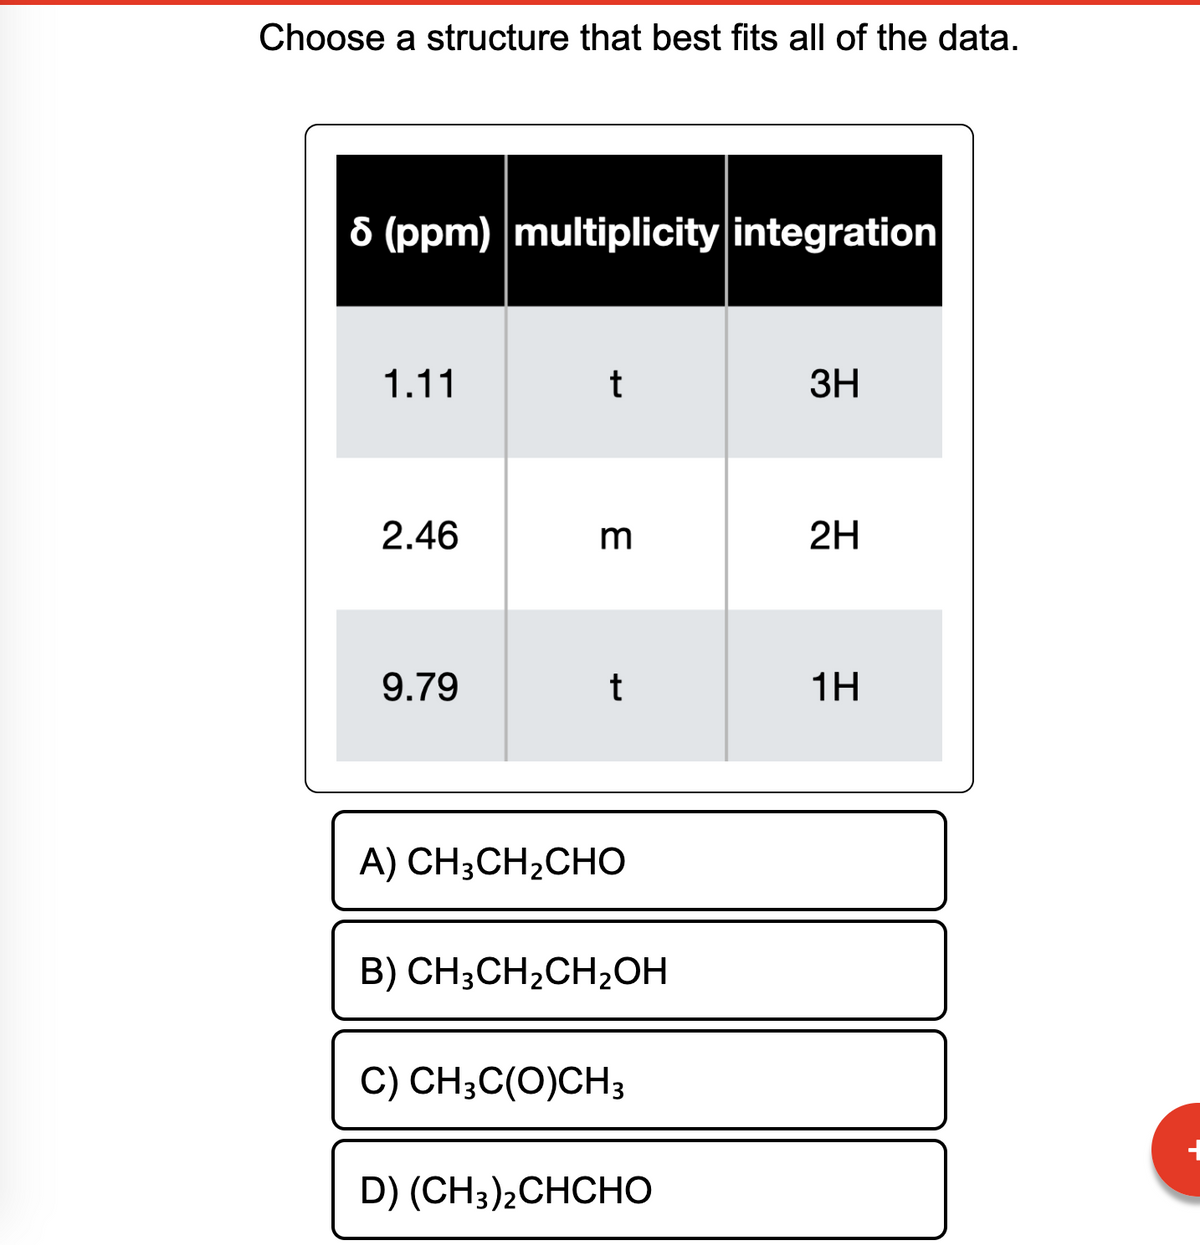 Choose a structure that best fits all of the data.
8 (ppm) multiplicity integration
1.11
2.46
9.79
t
3
t
A) CH3CH2CHO
B) CH3CH₂CH₂OH
C) CH3C(O)CH3
D) (CH3)2CHCHO
3H
2H
1H